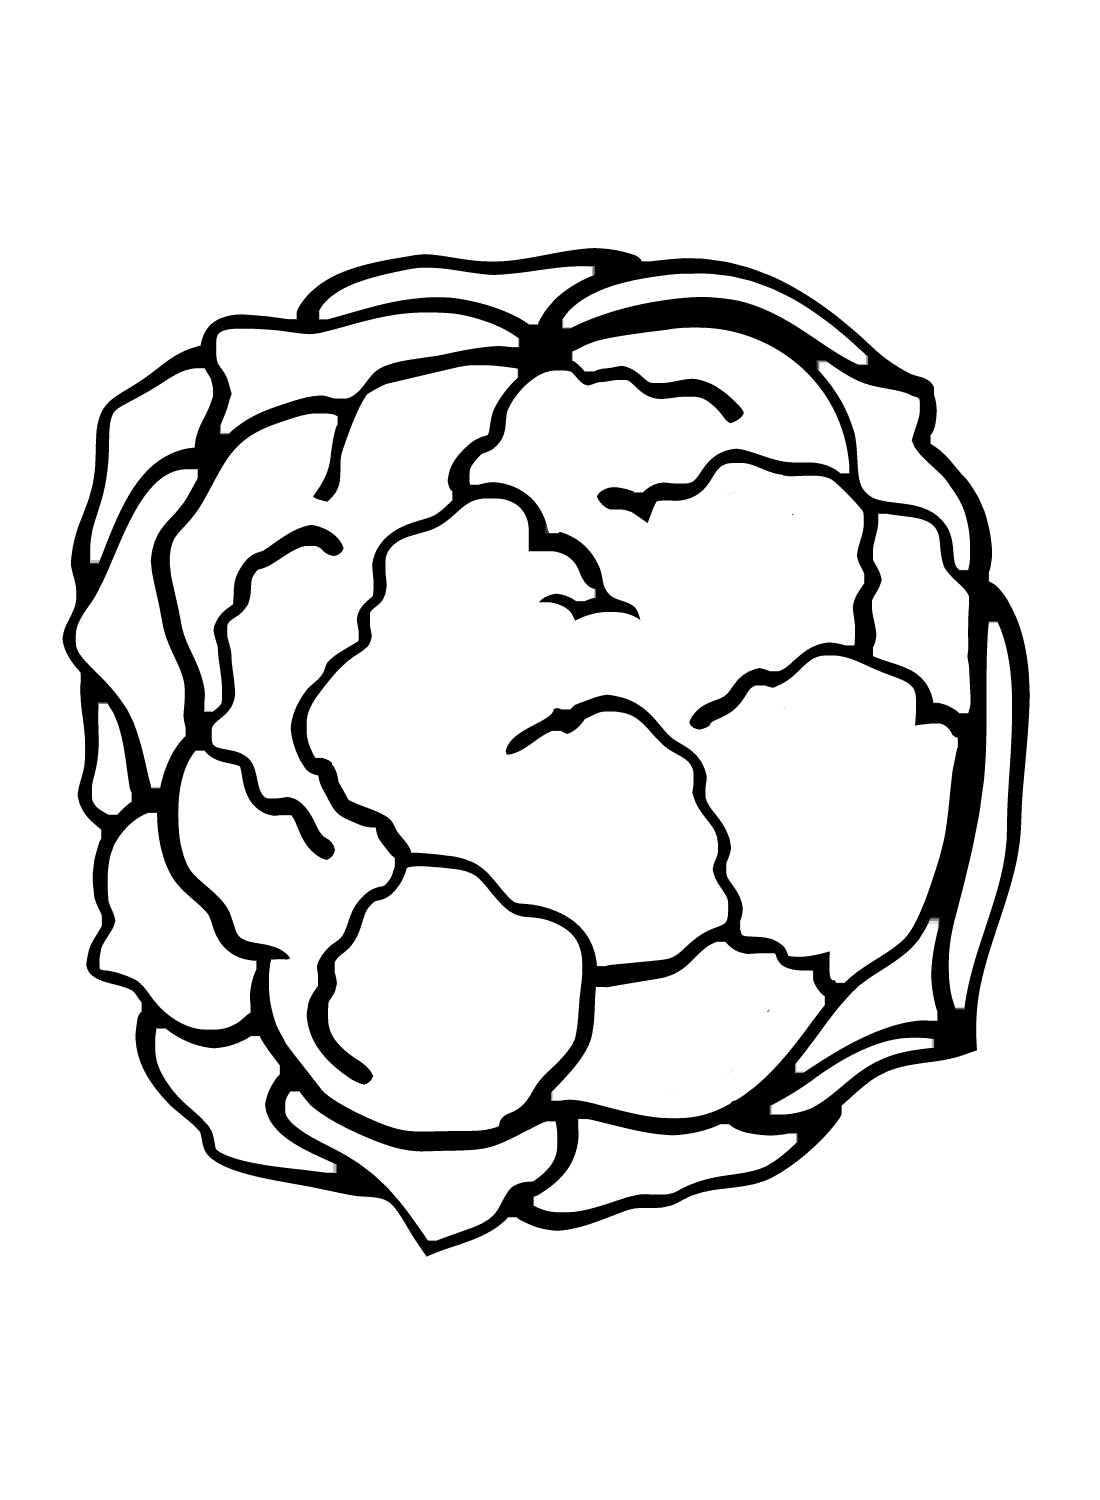 Cauliflower color Sheets Coloring Page